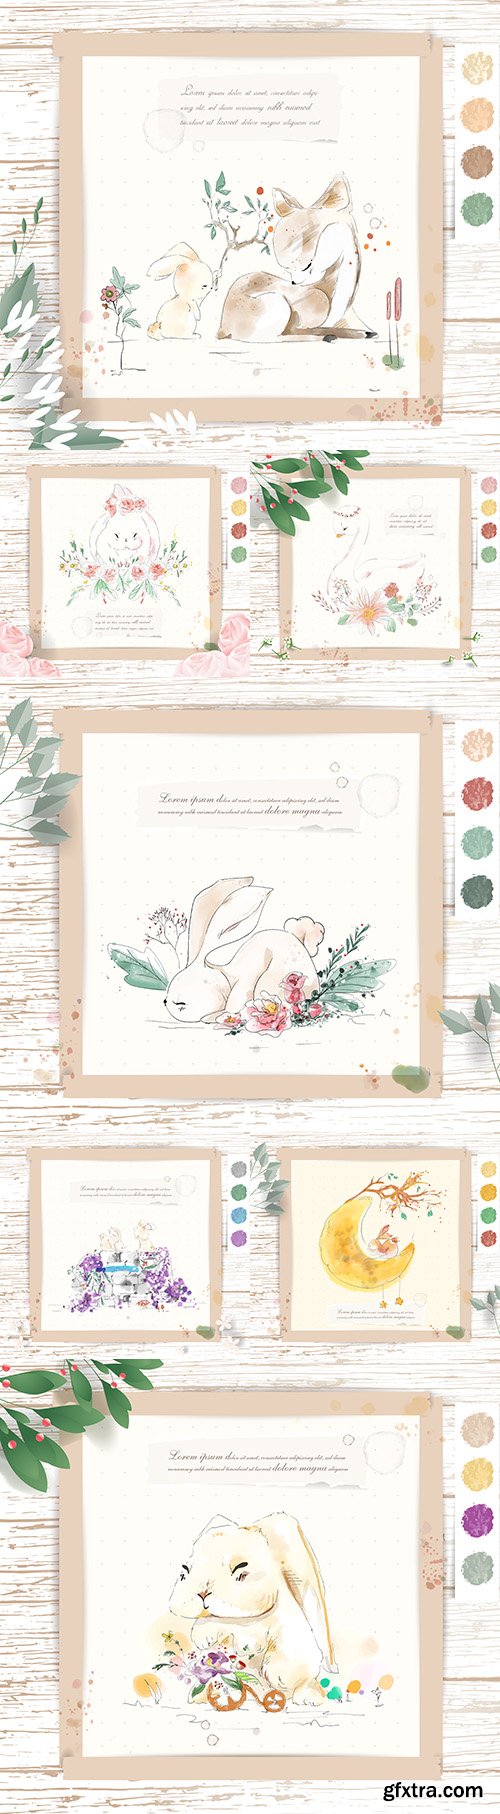 Watercolor cute animals with tropical flowers and leaves